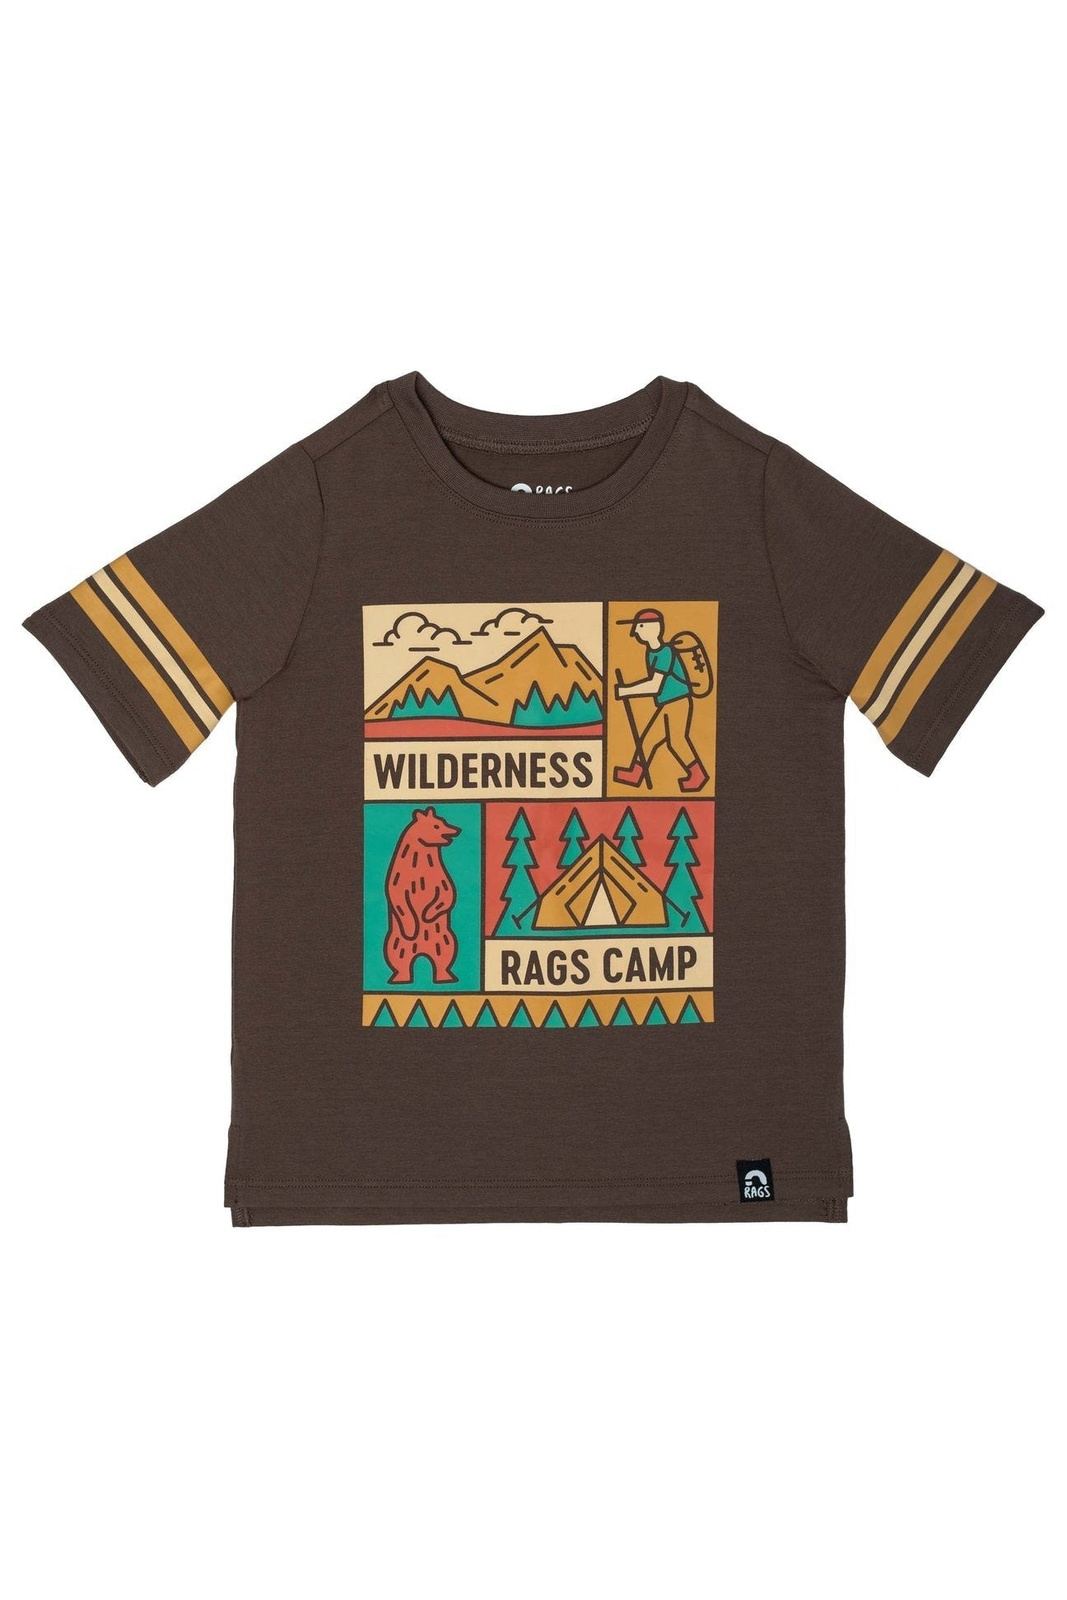 Retro Sleeve Kids Tee - 'Wilderness Rags Camp' - Major Brown - Tea for Three: A Children's Boutique-New Arrivals-TheT43Shop